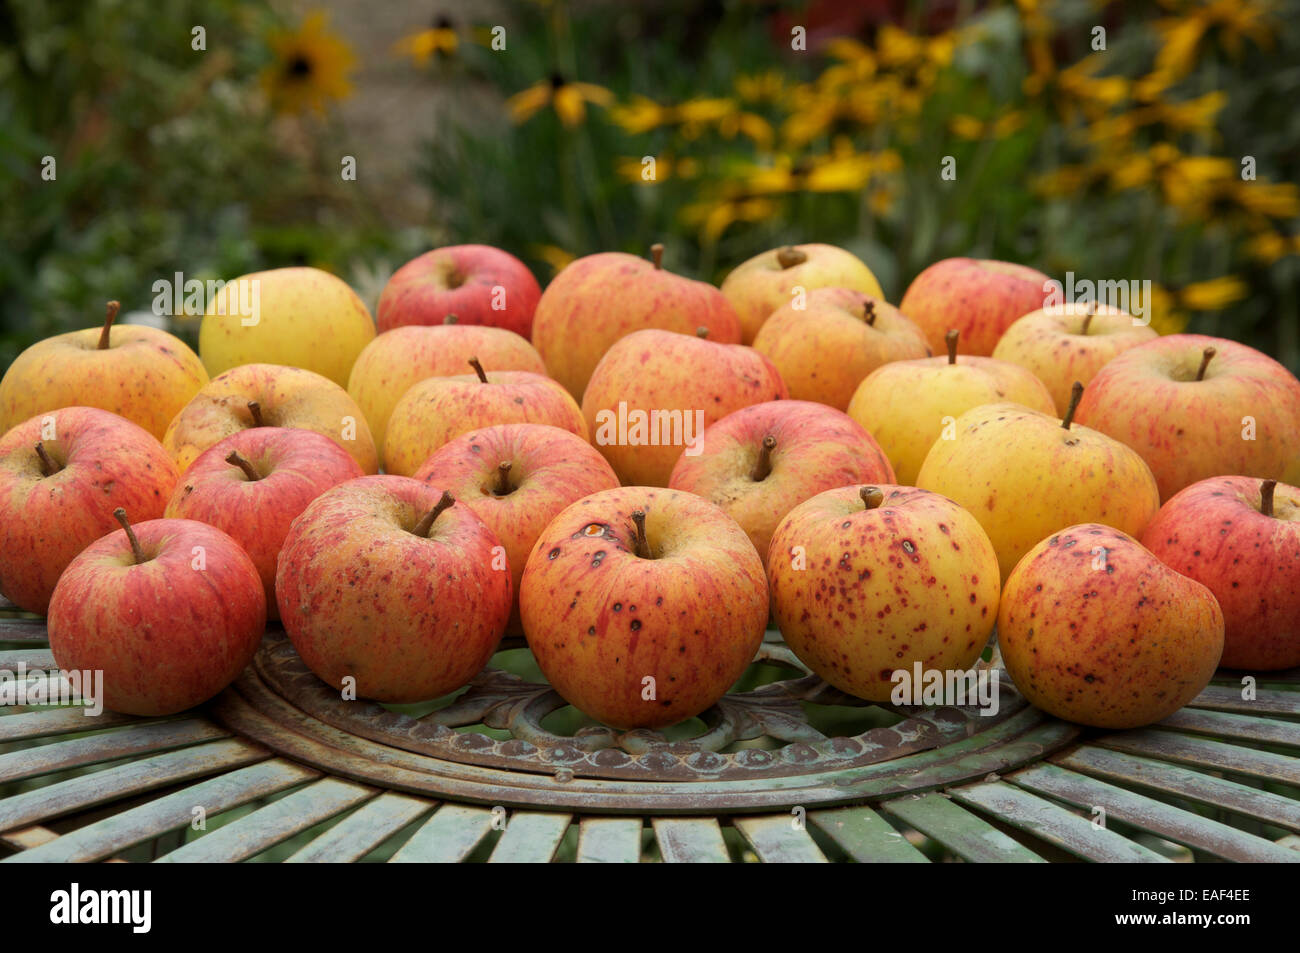 Natural, organic, tasty. Ripe eating apples, the sweet delicious fruit of the Apple tree “Malus domestica”, laid out on a metal garden table. England. Stock Photo